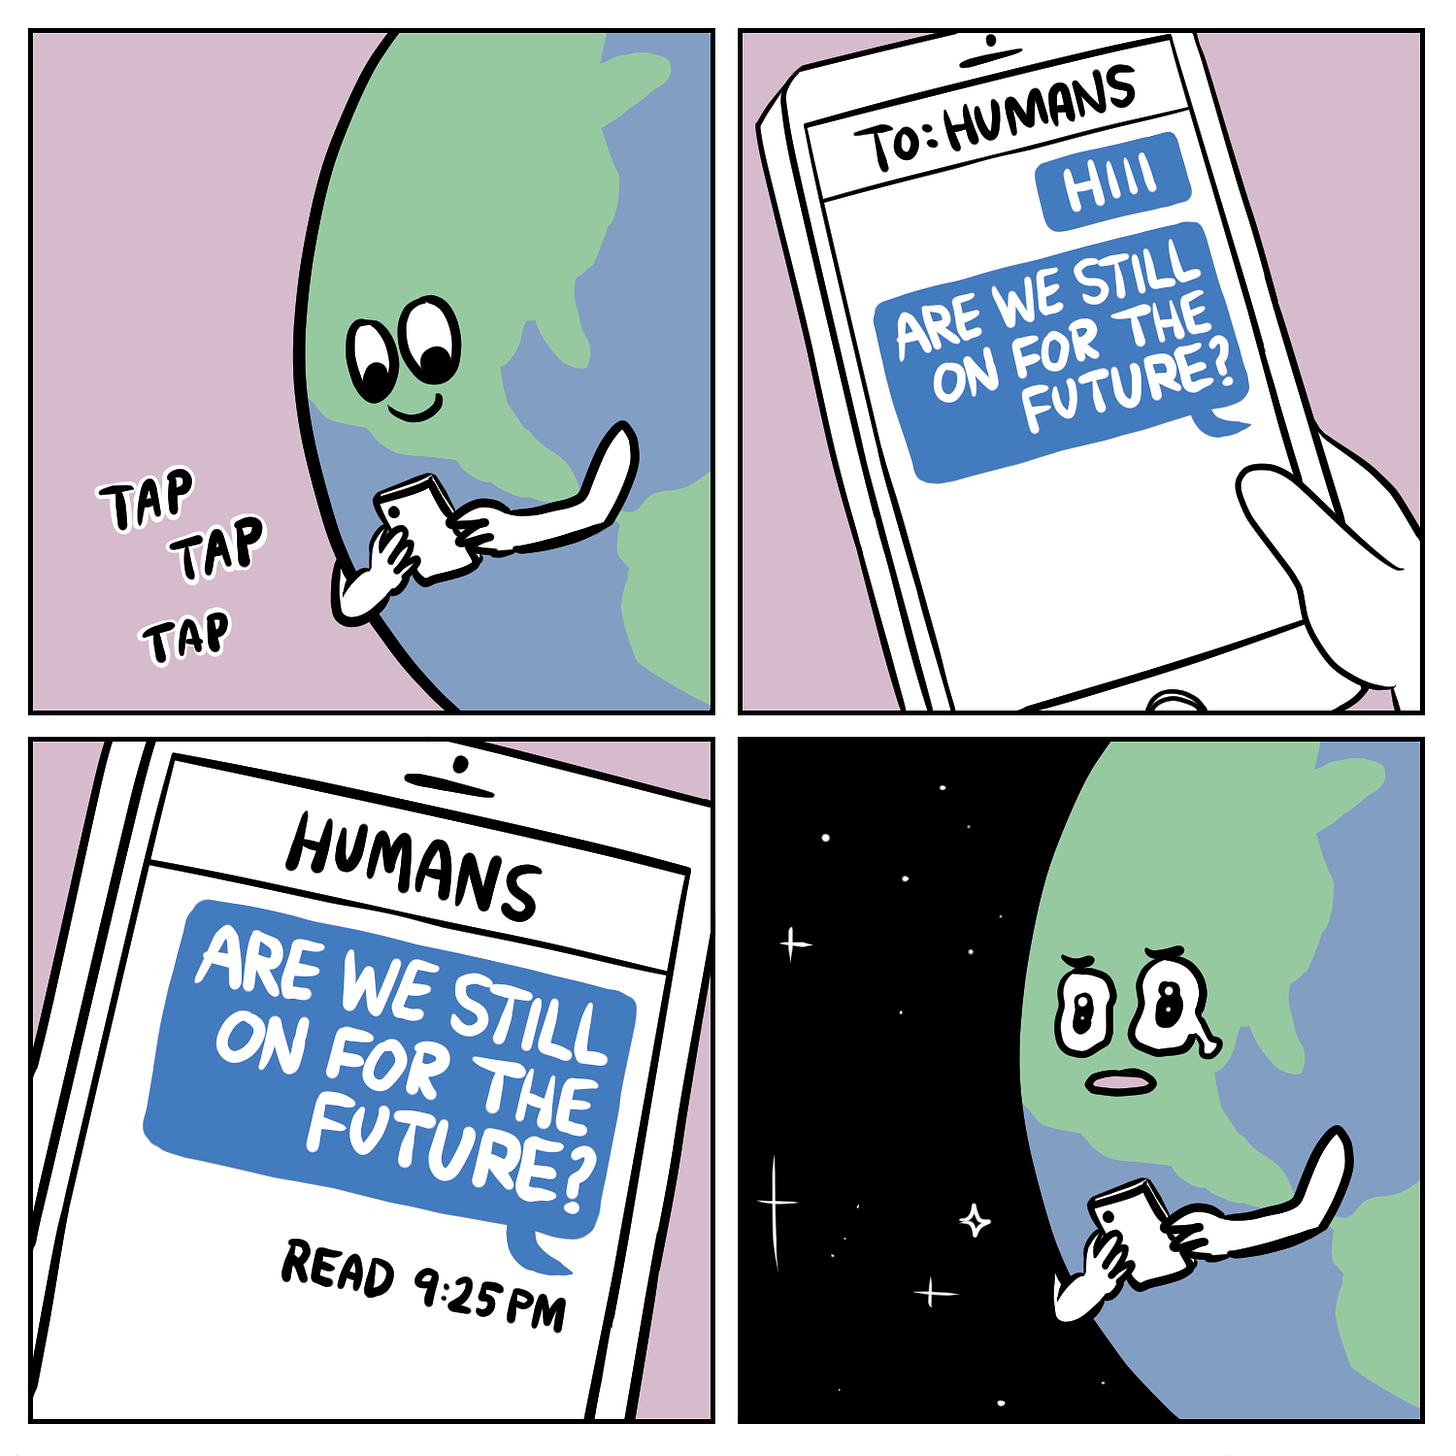 Comic. Panel 1: Earth tapping on smartphone. Panel 2: They send a text to 'Humans' asking 'Are we still on for the future?' Third panel: Message is left on read. Fourth panel: Earth cries